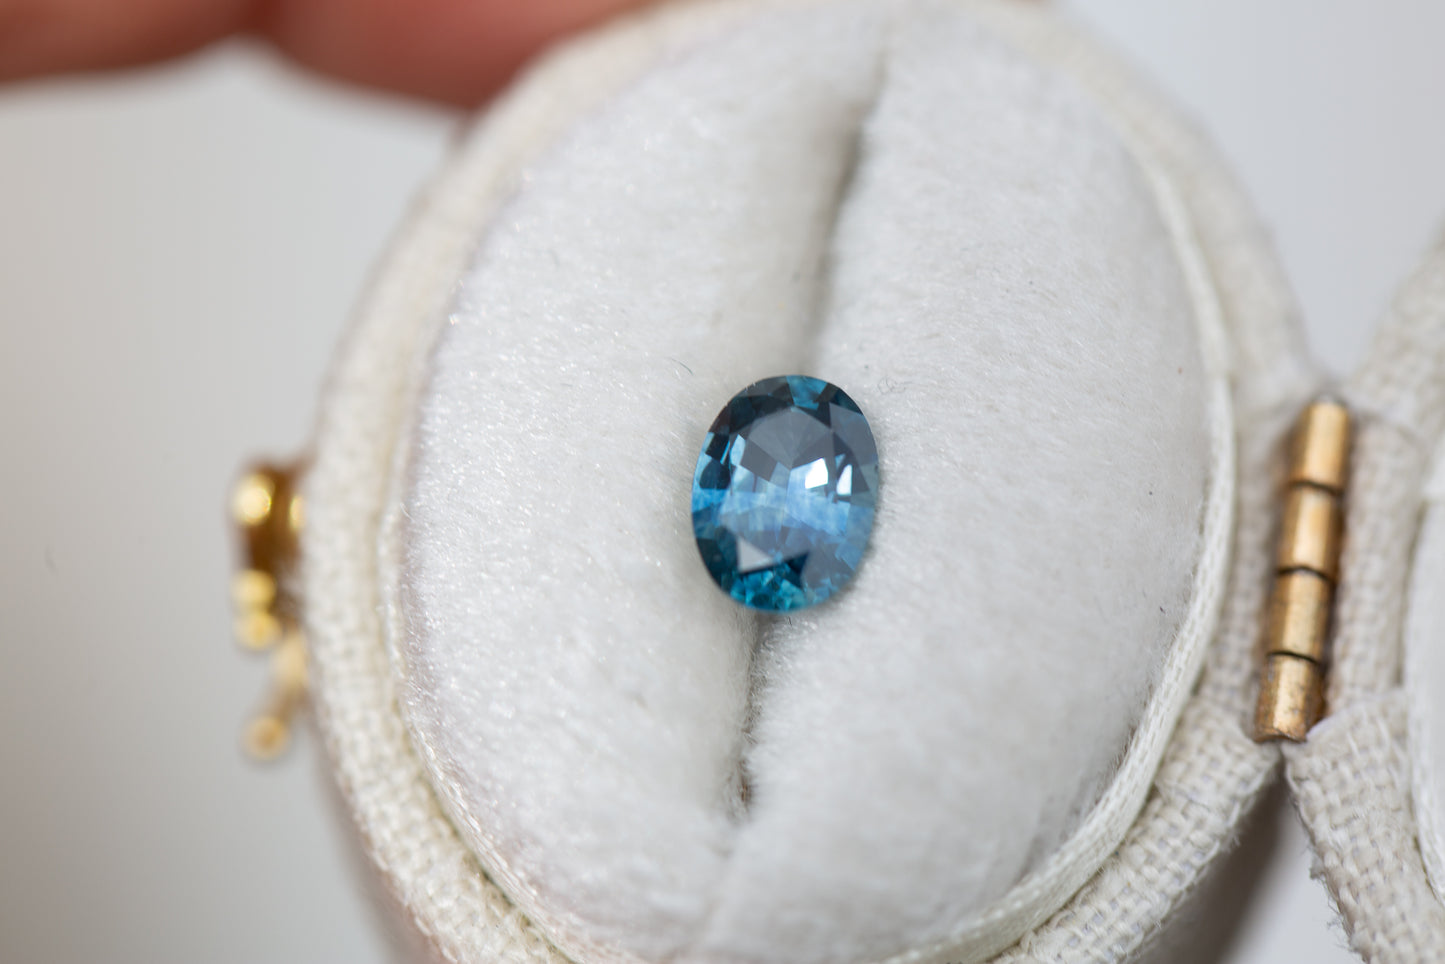 .84ct oval blue teal sapphire